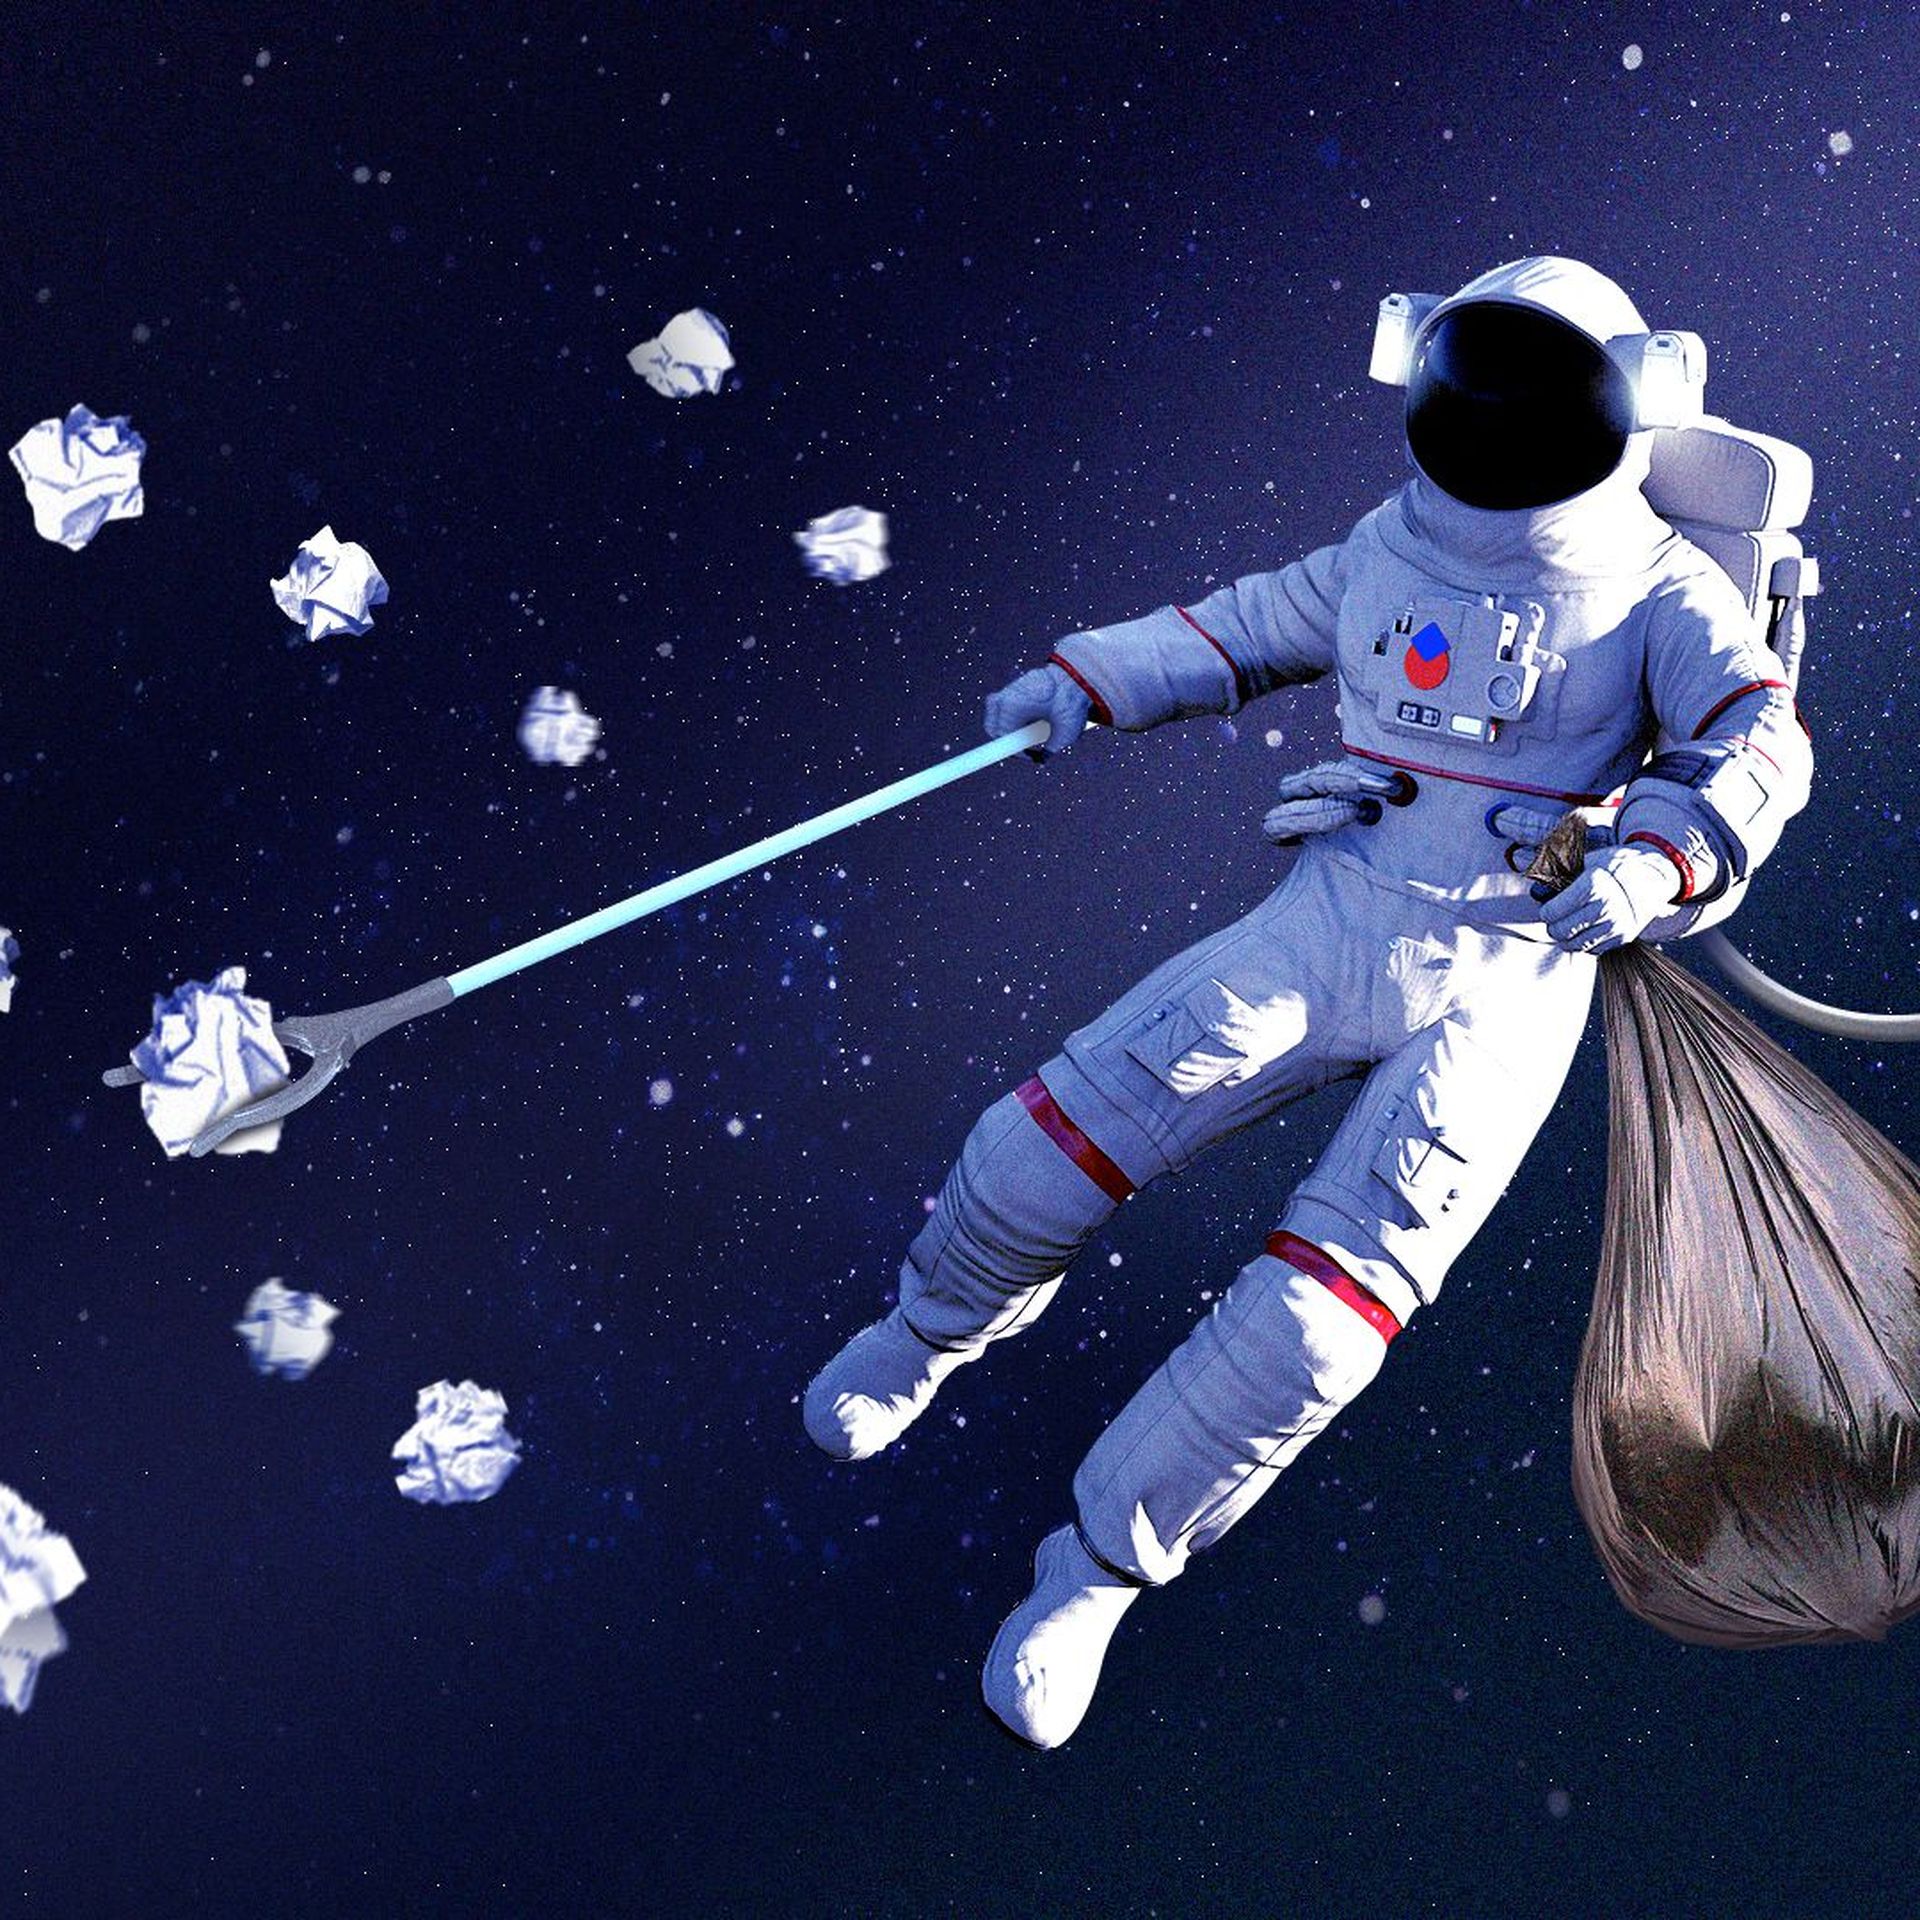 Illustration of an astronaut floating in outer space while collecting trash and holding a garbage bag.